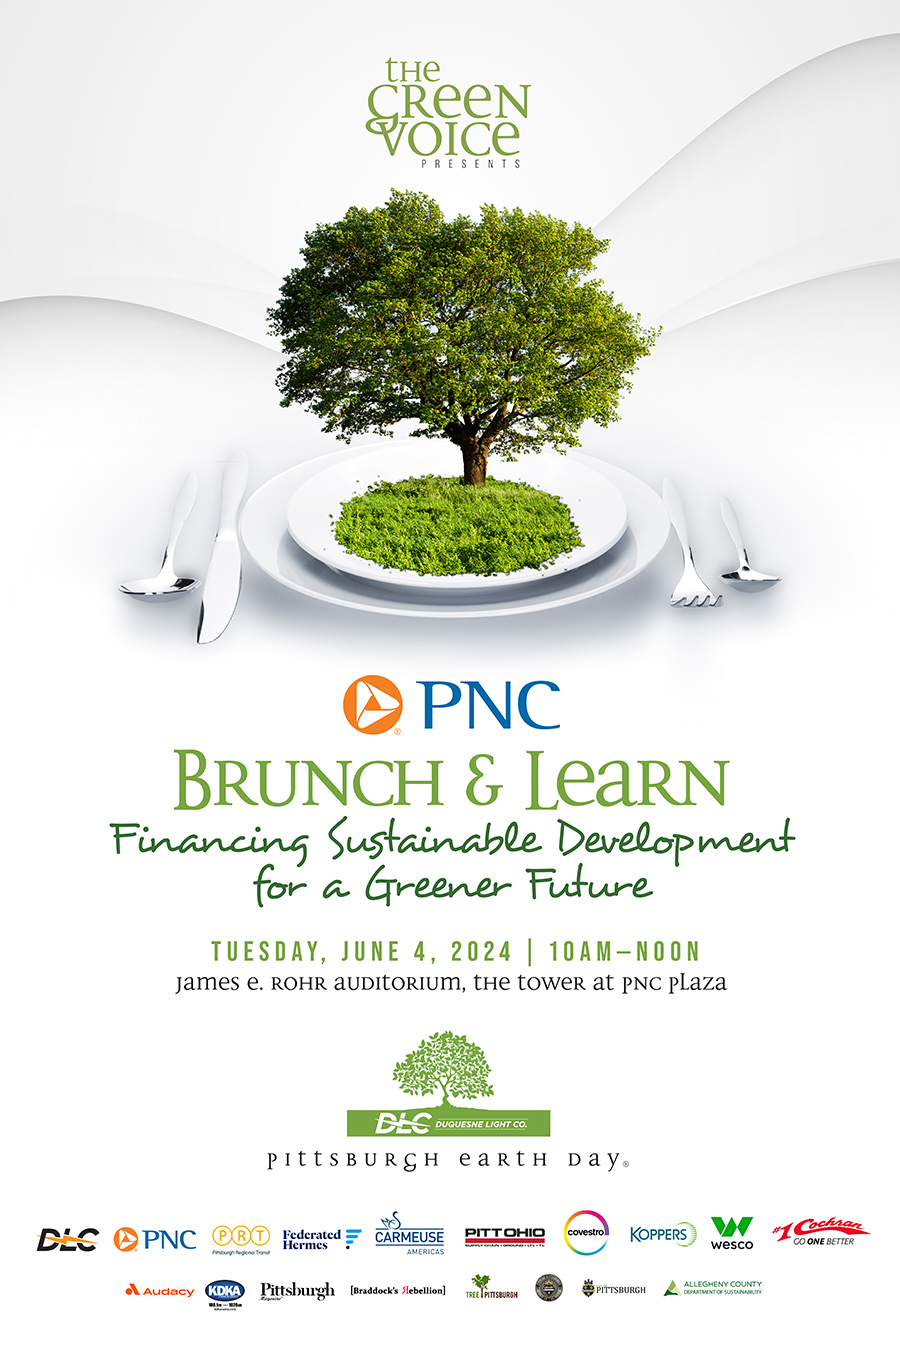 PNC Brunch and Learn